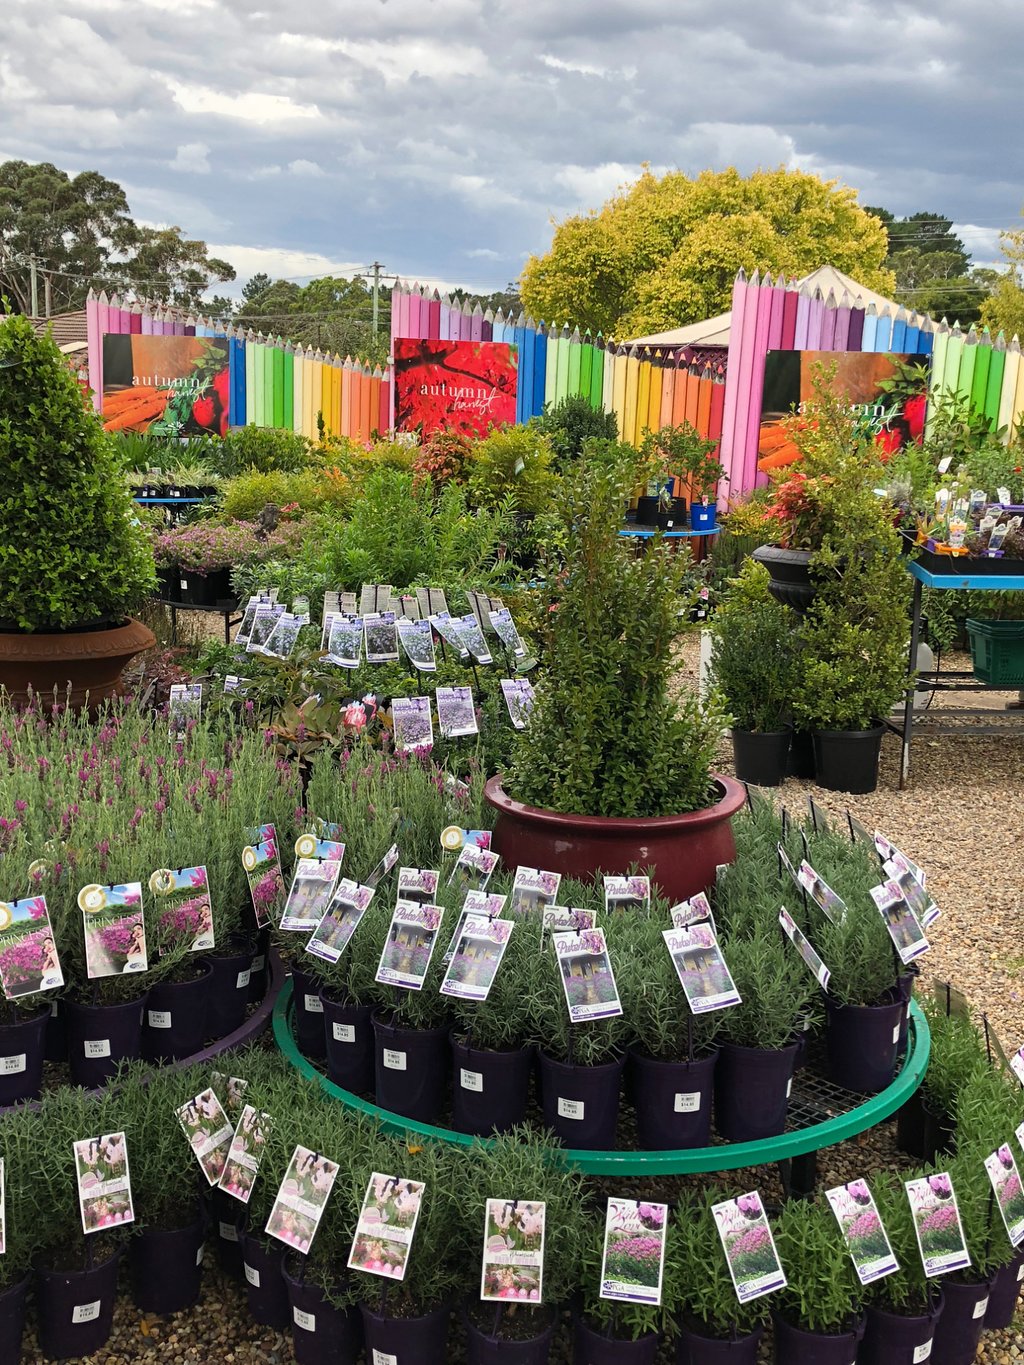 Mittagong Garden Centre | store | 25 Old Hume Hwy, Balaclava NSW 2575, Australia | 0248723900 OR +61 2 4872 3900